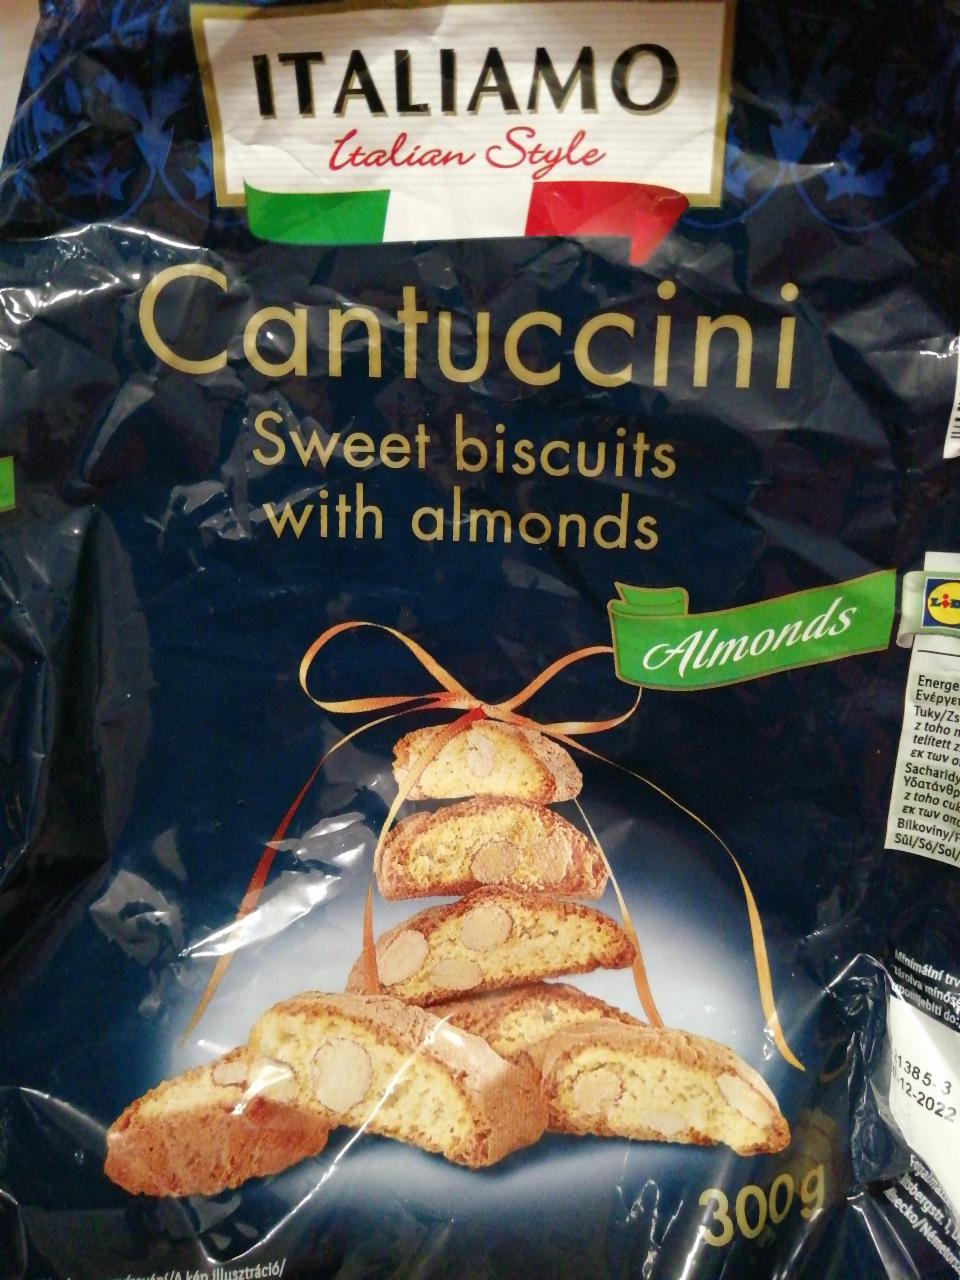 Cantuccini Sweet biscuits kalorie, Italiamo nutriční hodnoty almonds - kJ with a